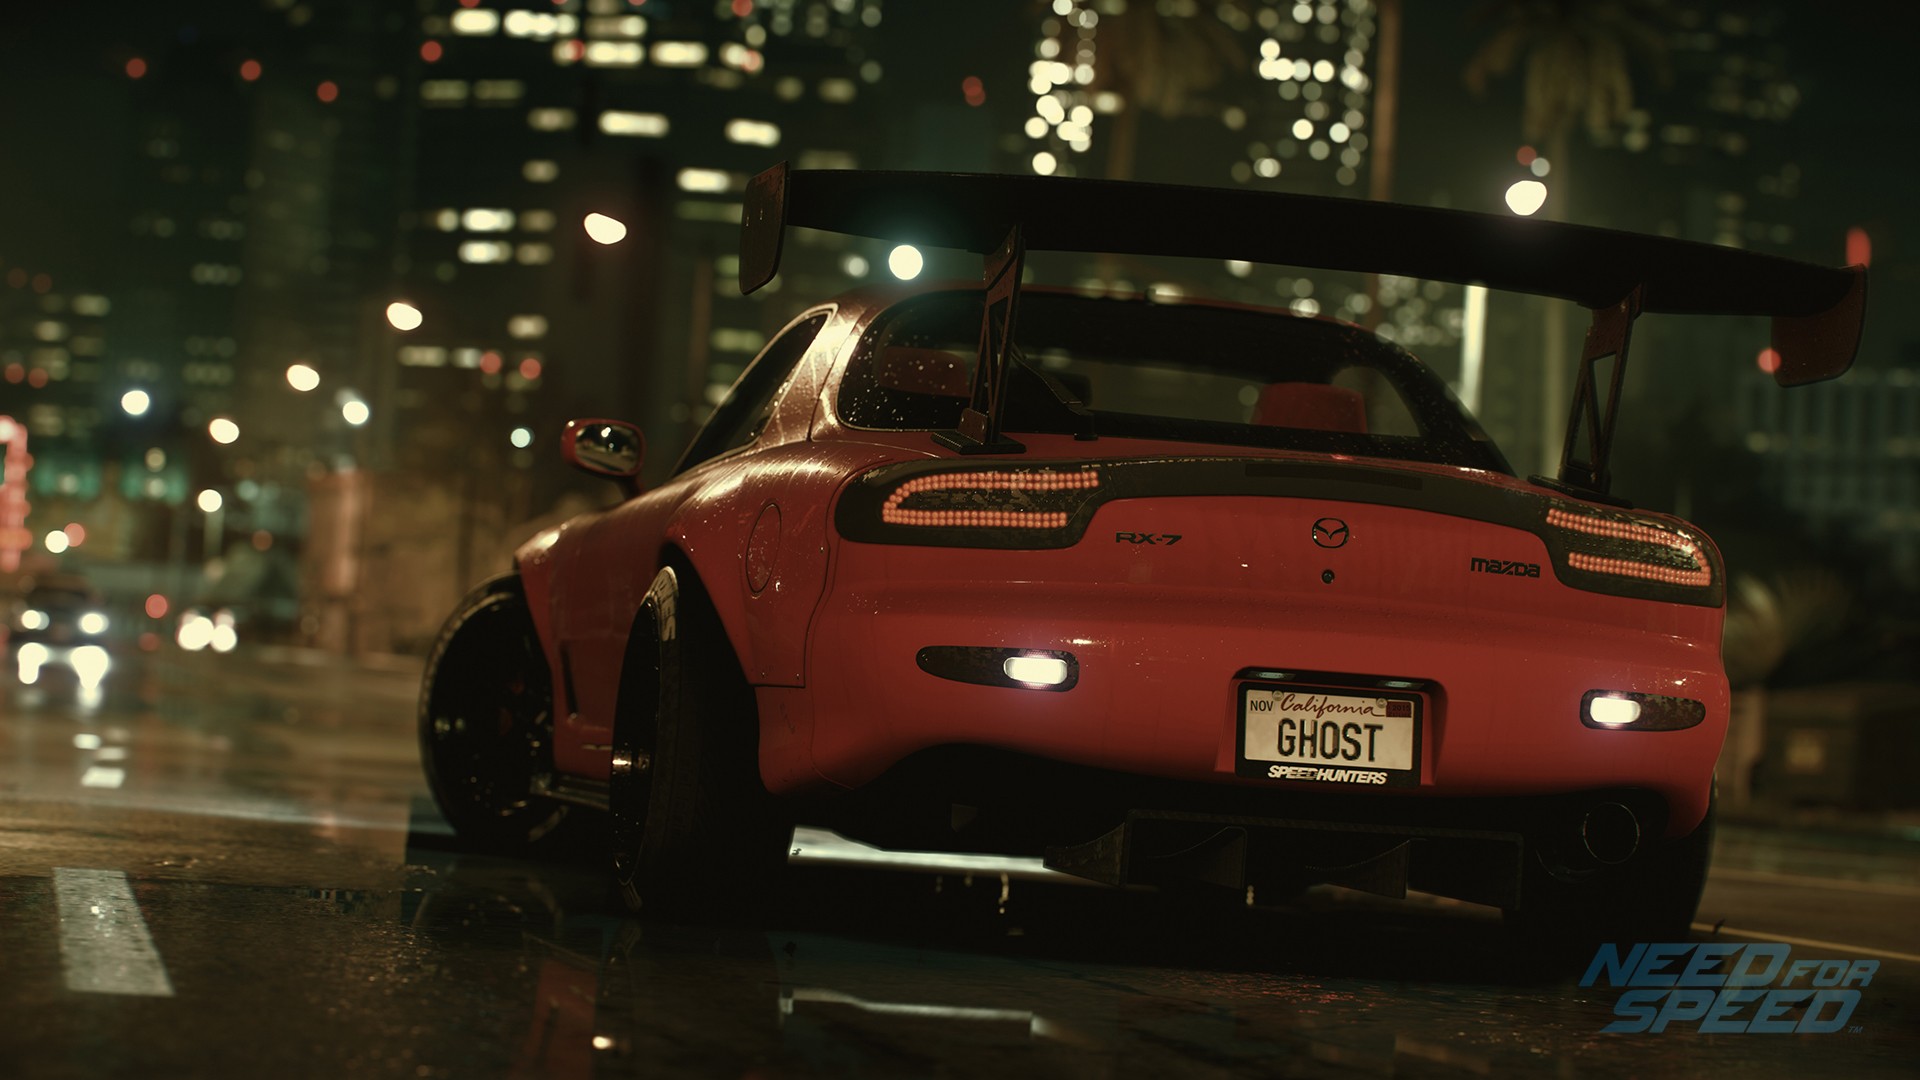 General 1920x1080 car vehicle sports car Mazda RX-7 Mazda colored wheels Japanese cars Need for Speed wet street PC gaming video games screen shot red cars